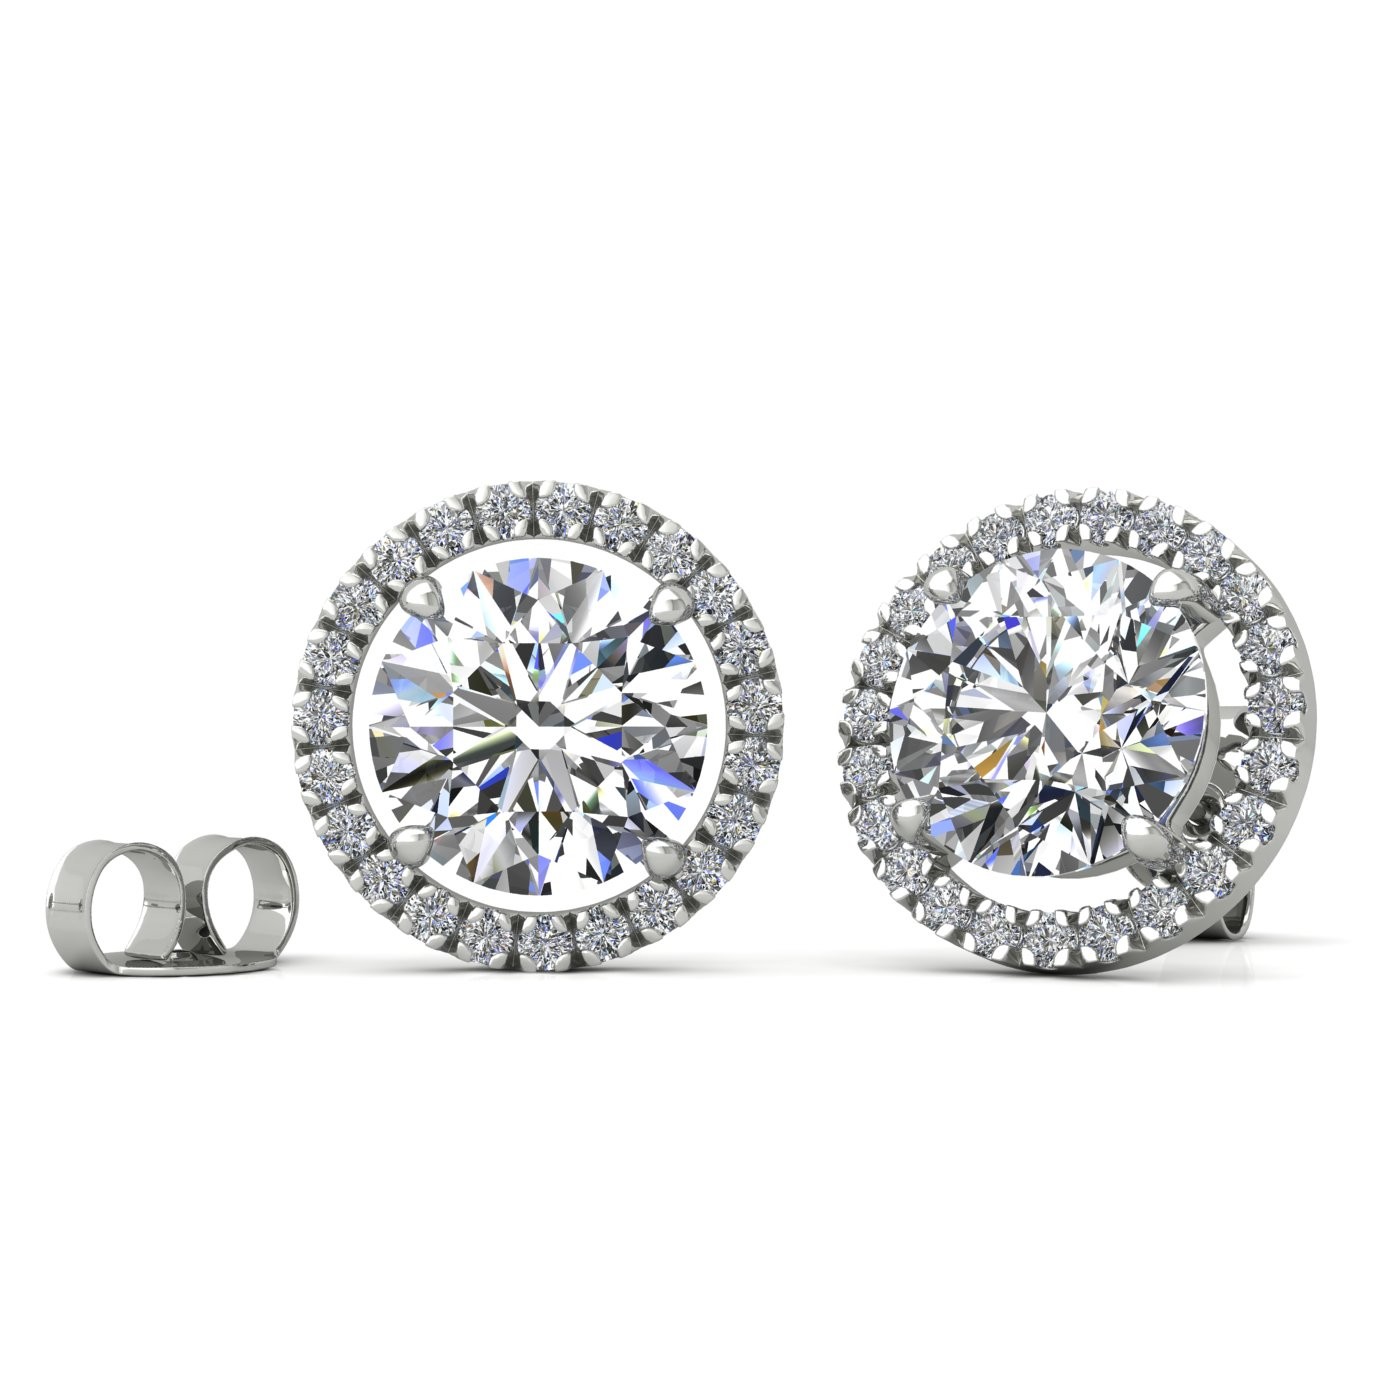 18k white gold  1,5 ct each (3 tcw) 4 prongs round brilliant cut halo diamond earring studs Photos & images